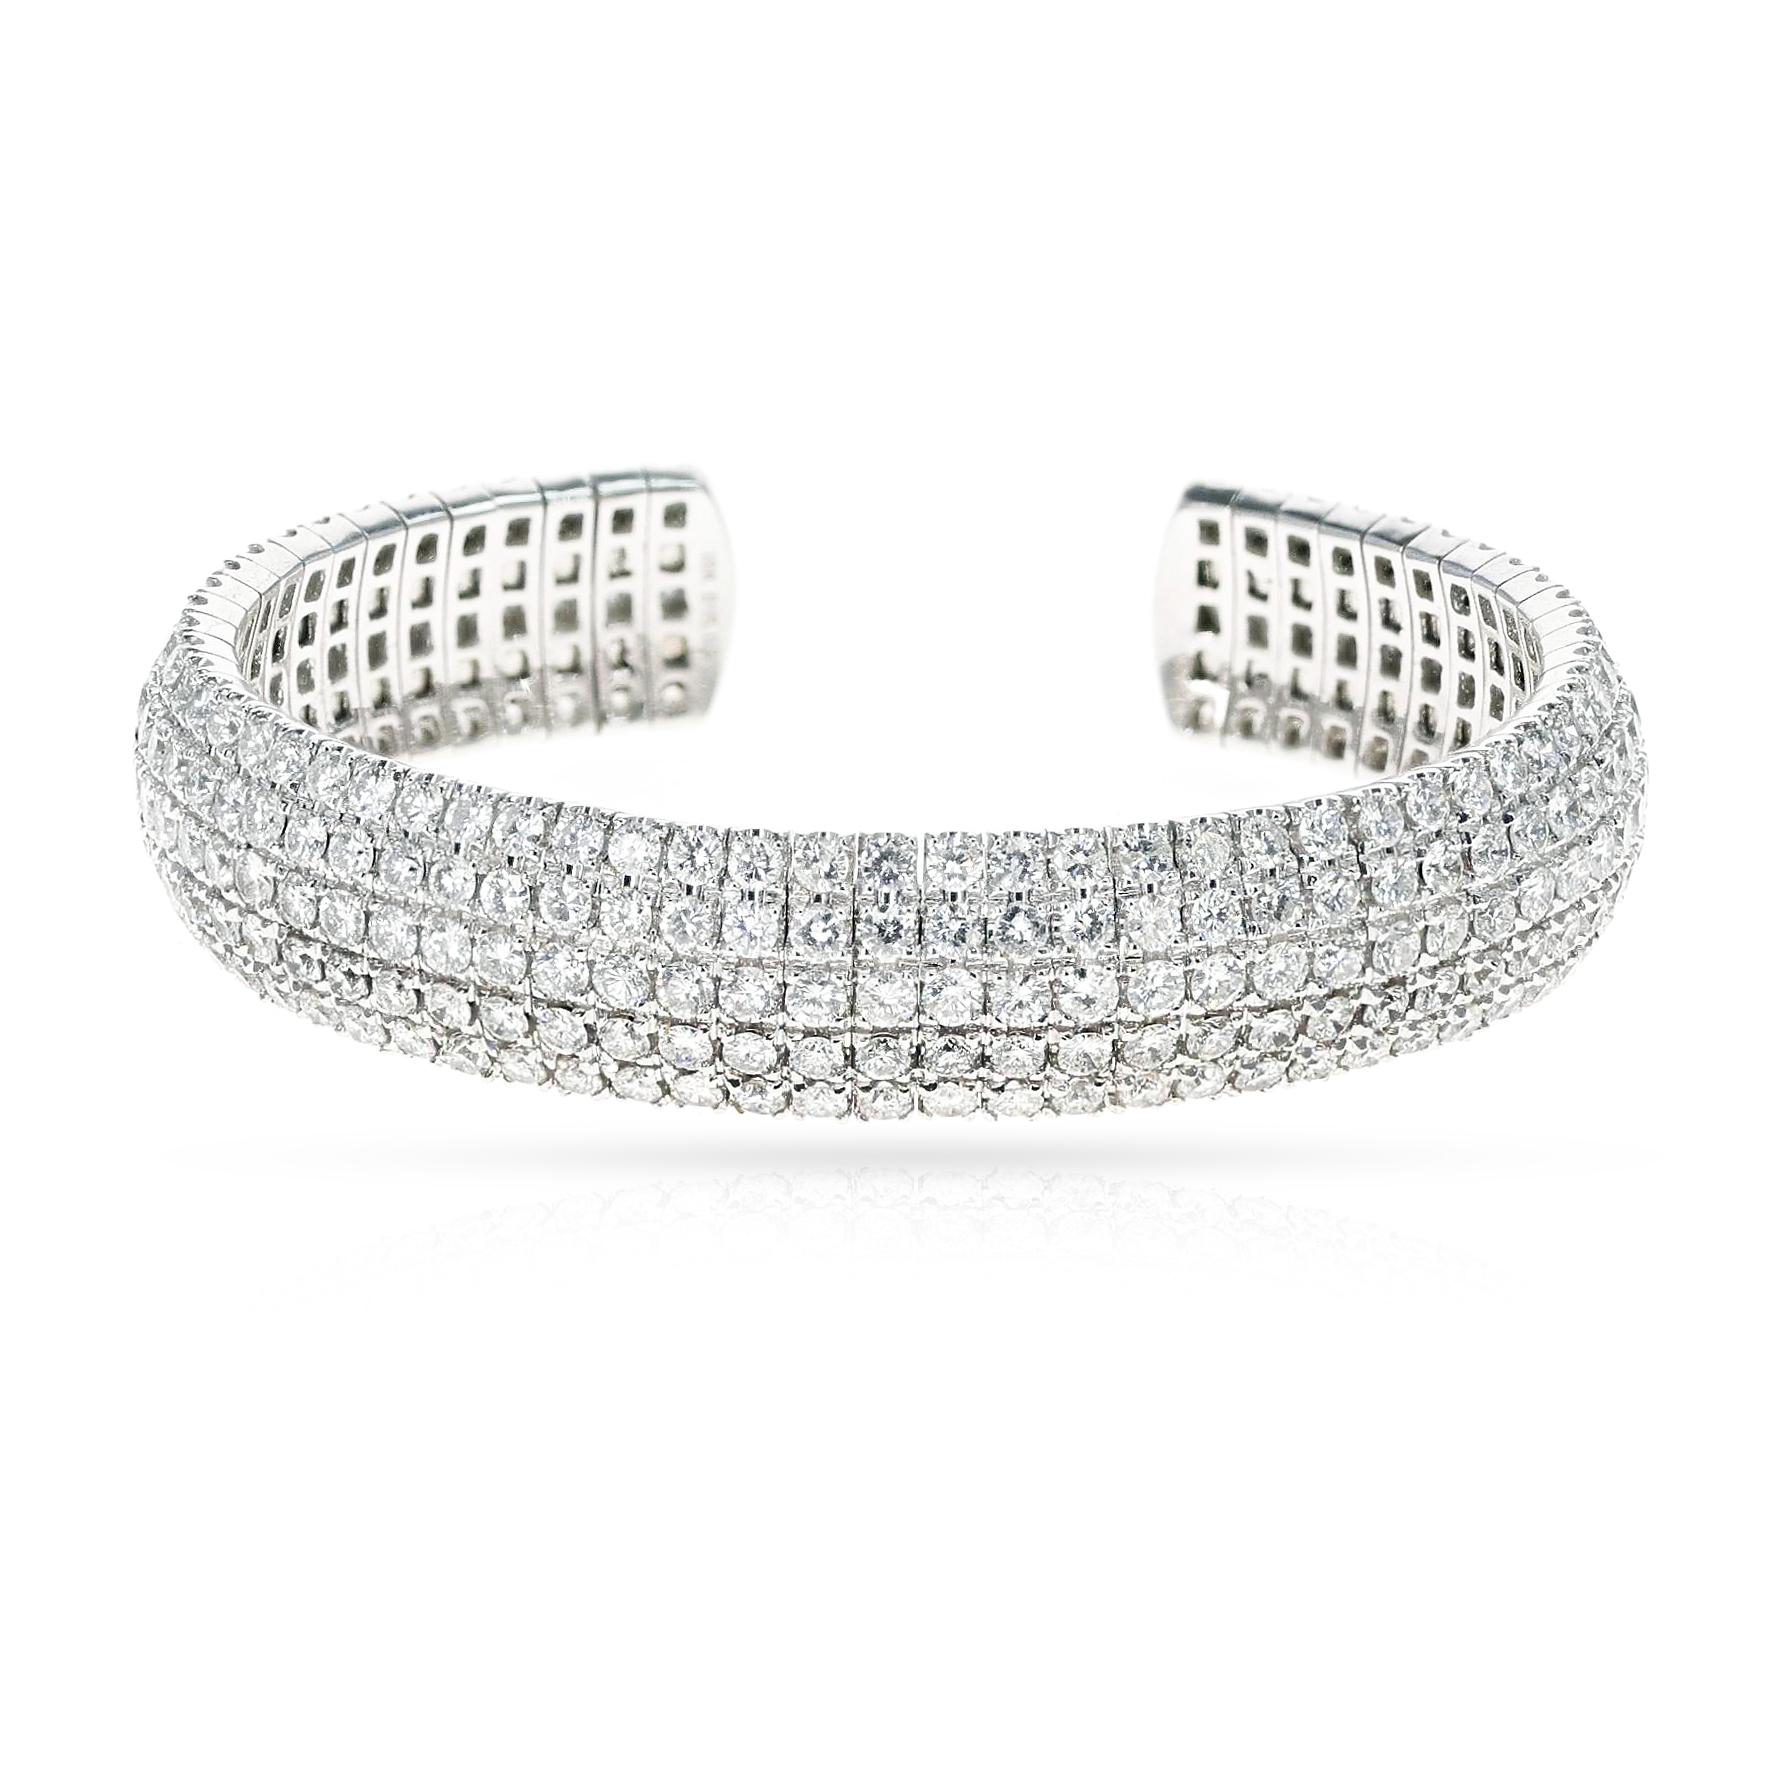 A flexible diamond bangle made with 15 carats of diamonds with G-H Color and Clarity VS/SI made in 18k White Gold. The total weight is 49.60 grams



SKU 1241- RIJTAJM